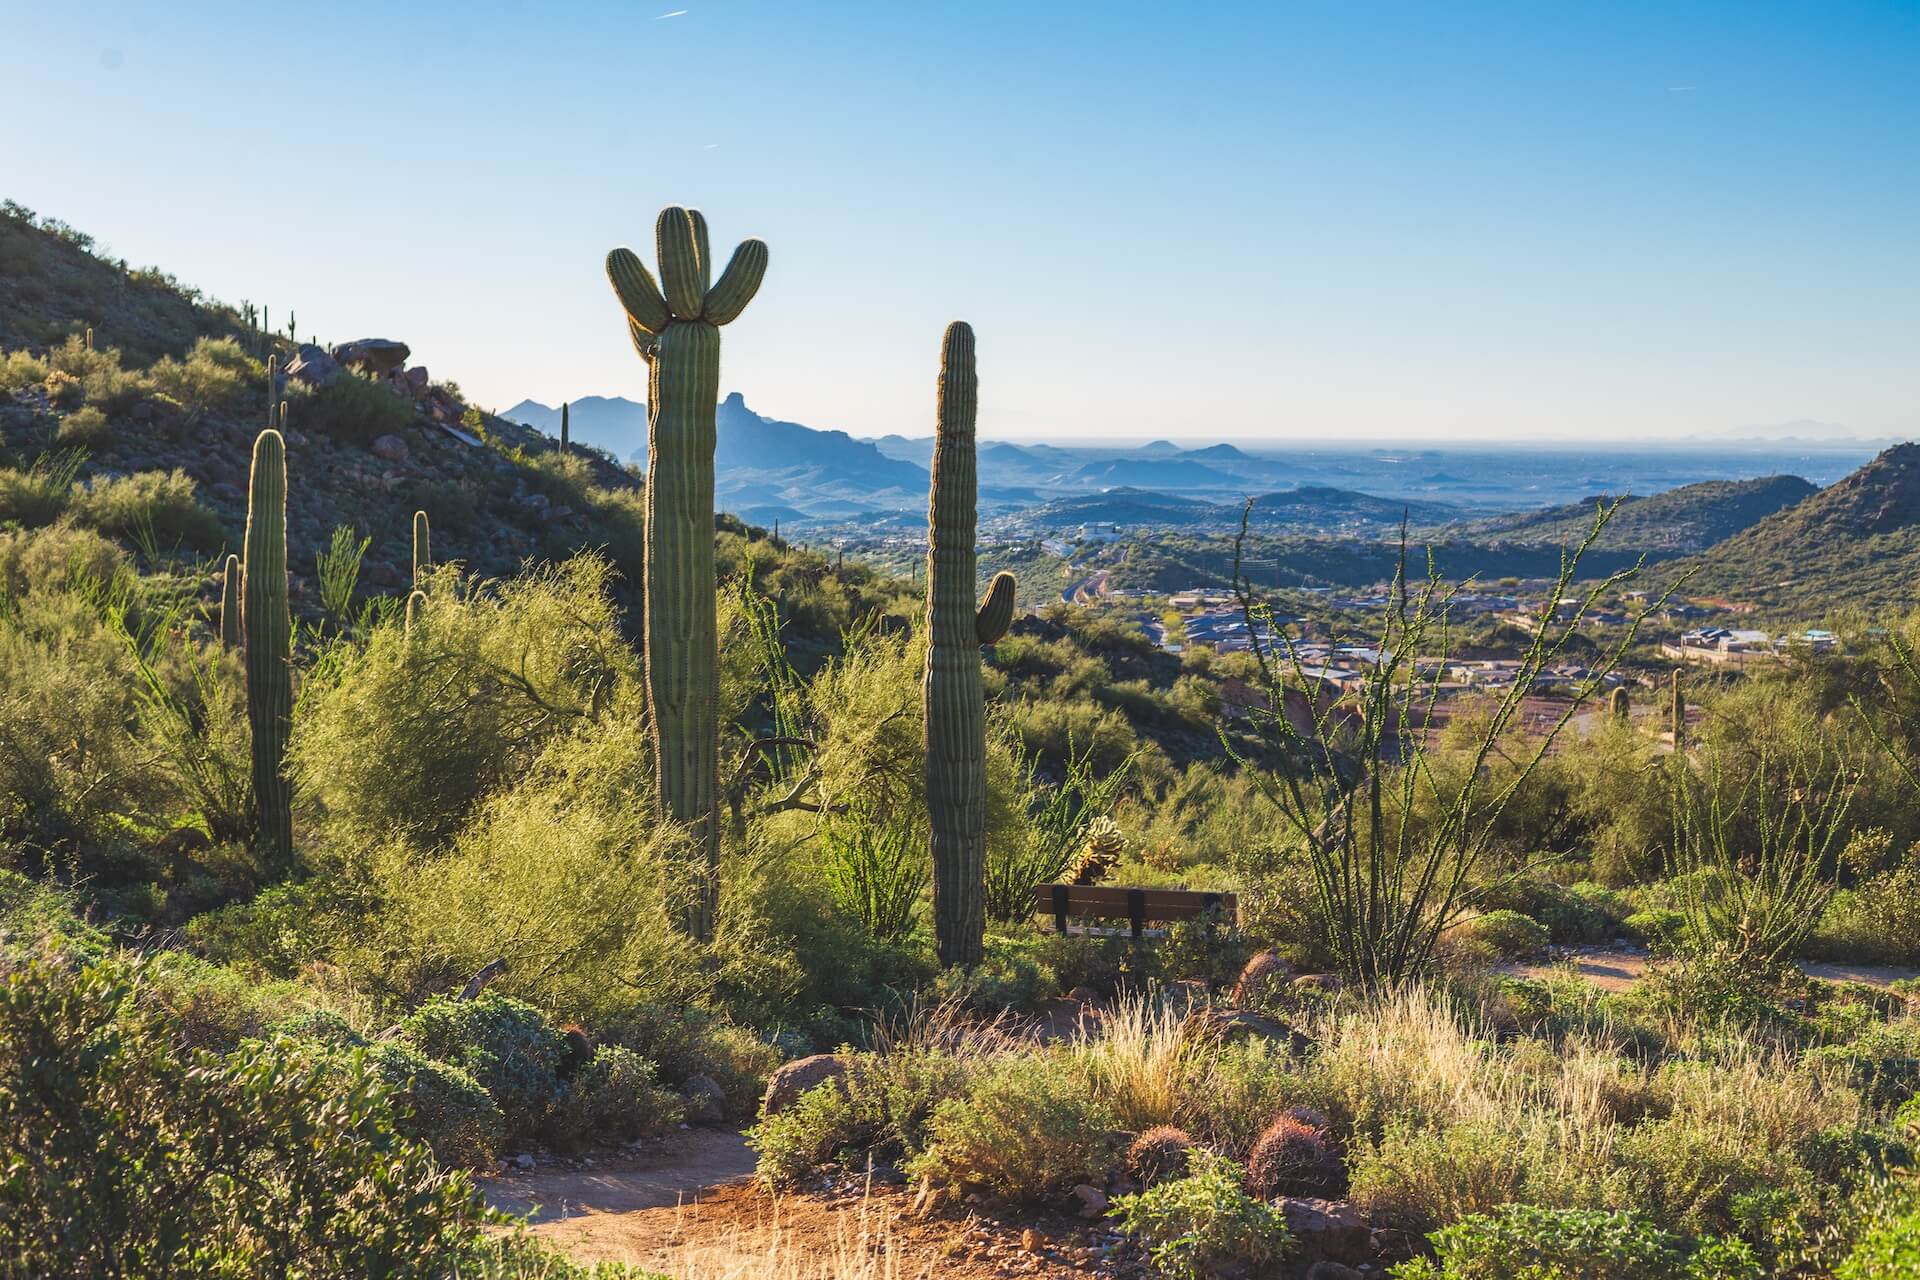 Cacti and lush landscape in the foreground, on a hill overlooking the Scottsdale Arizona area